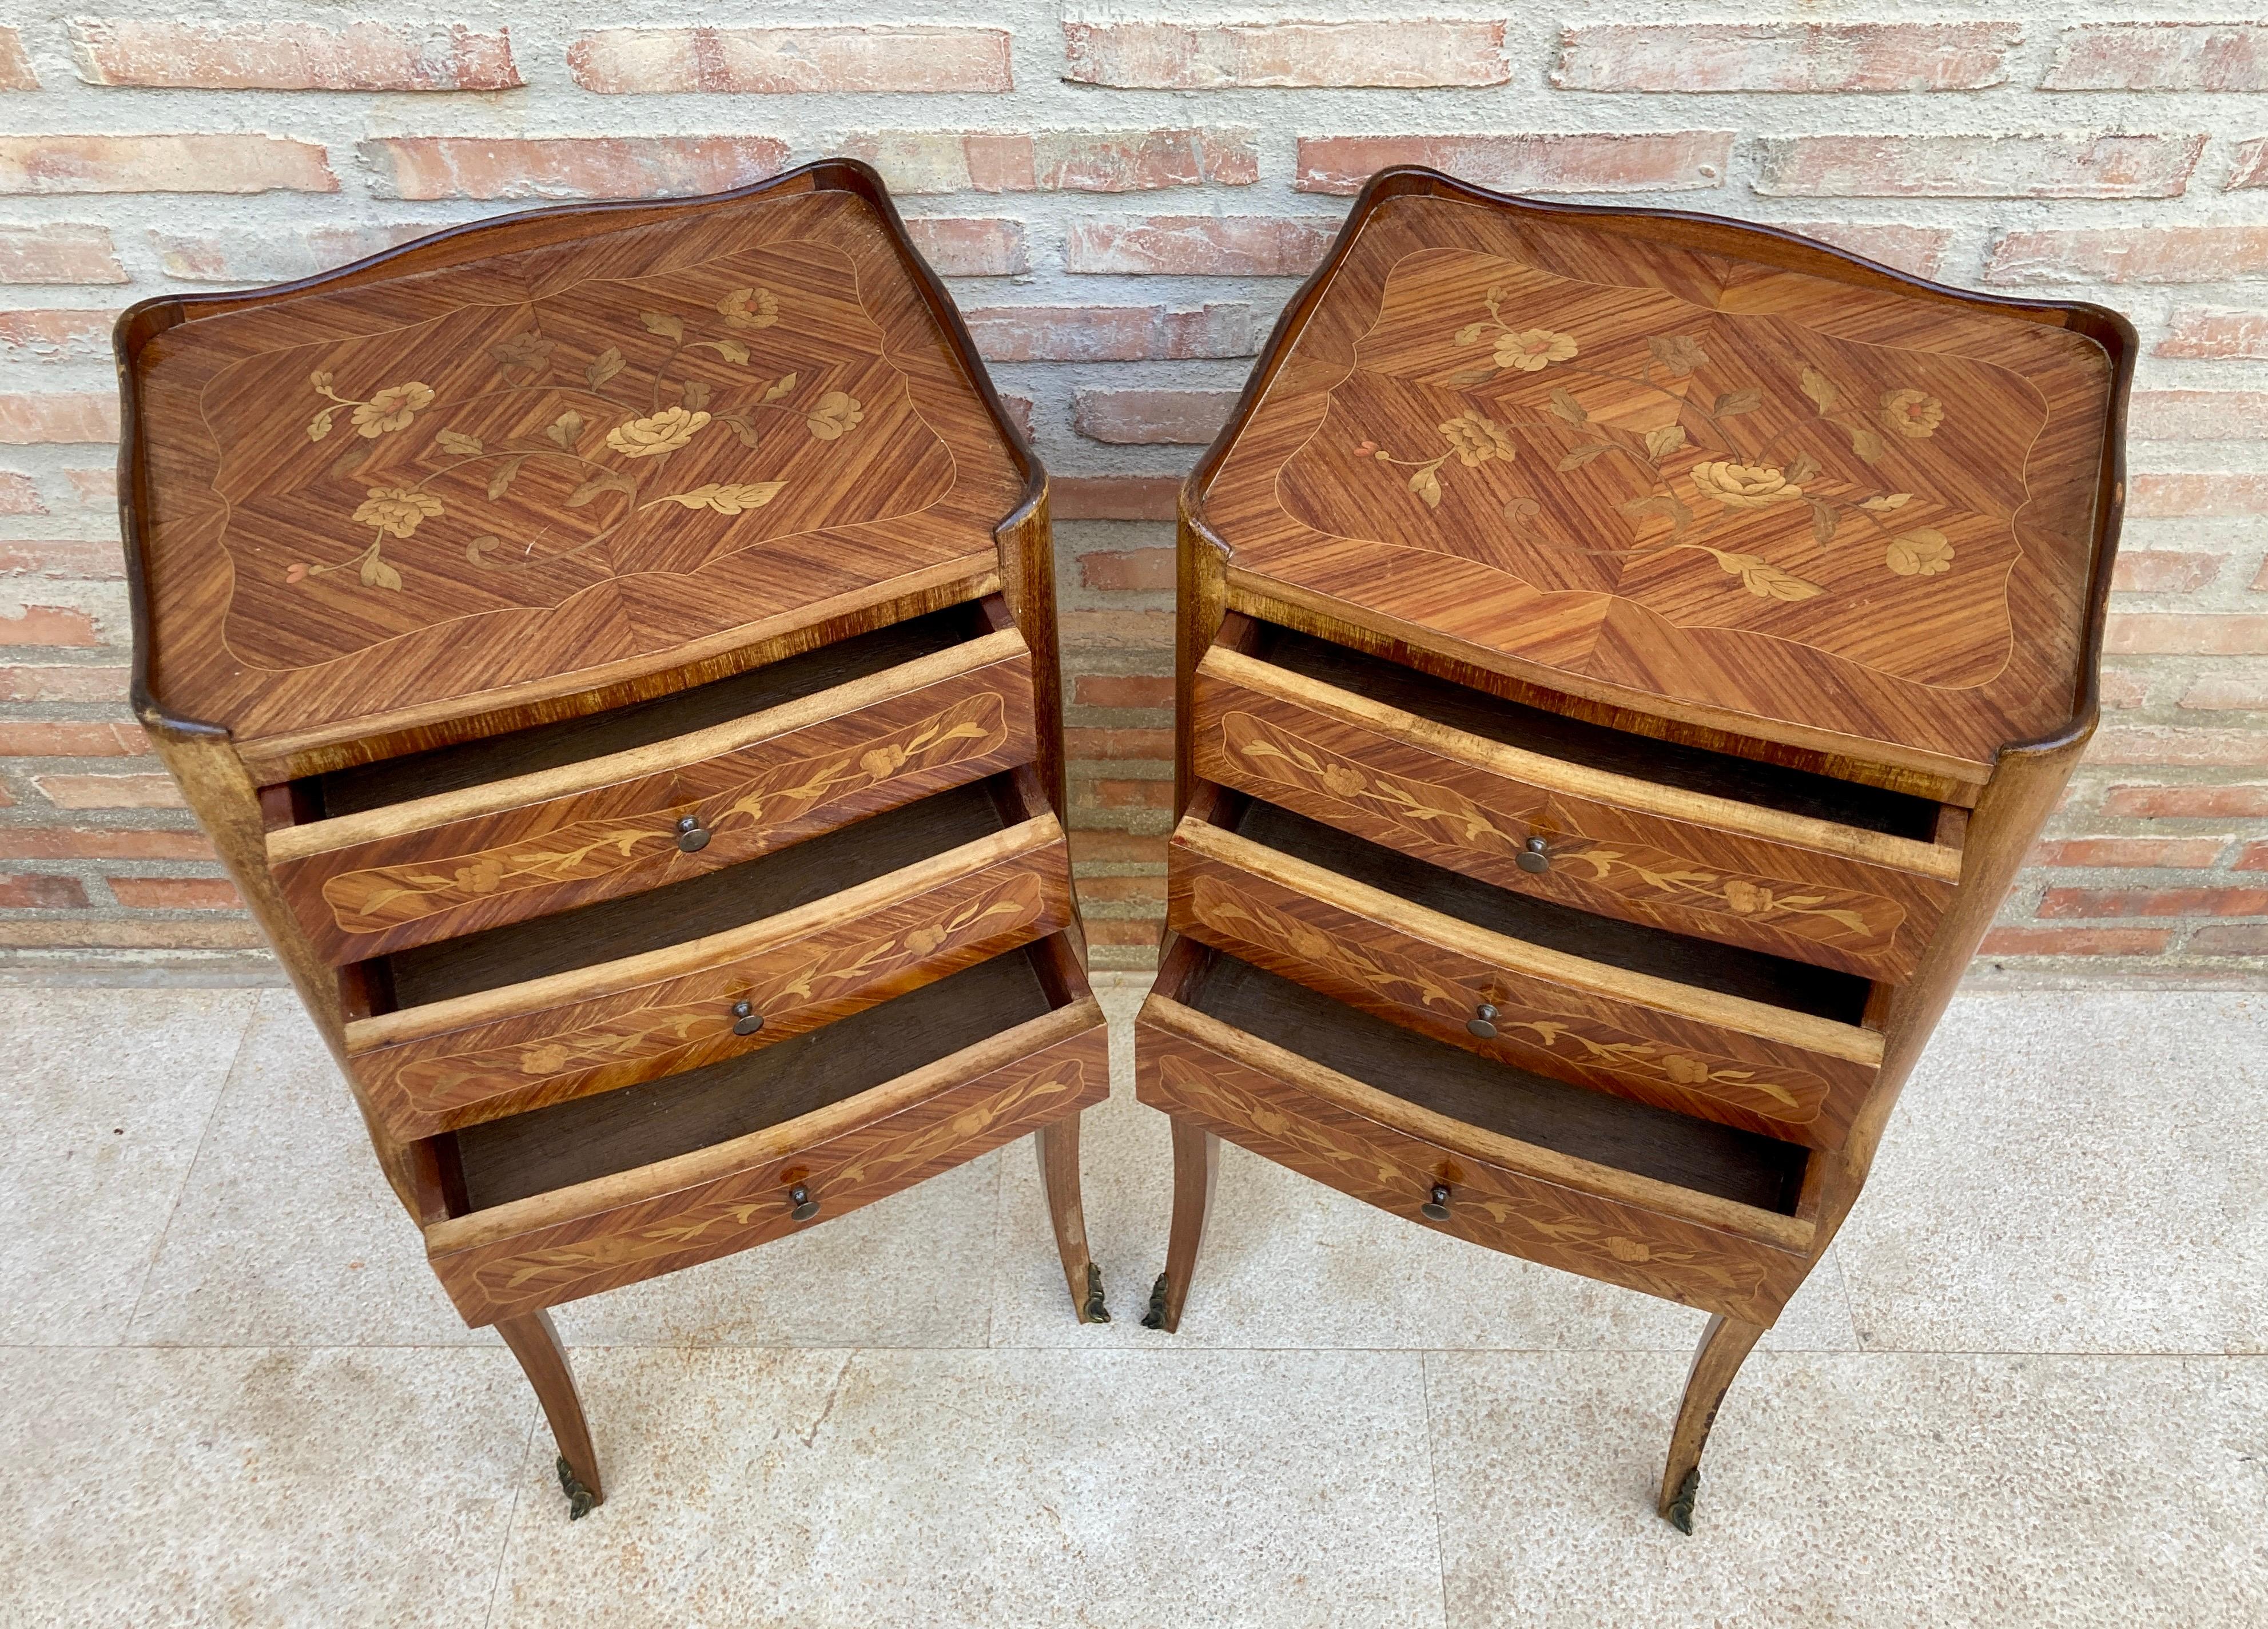 20th Century French Nightstands in Walnut with Three Drawers, 1940s, Set of 2 For Sale